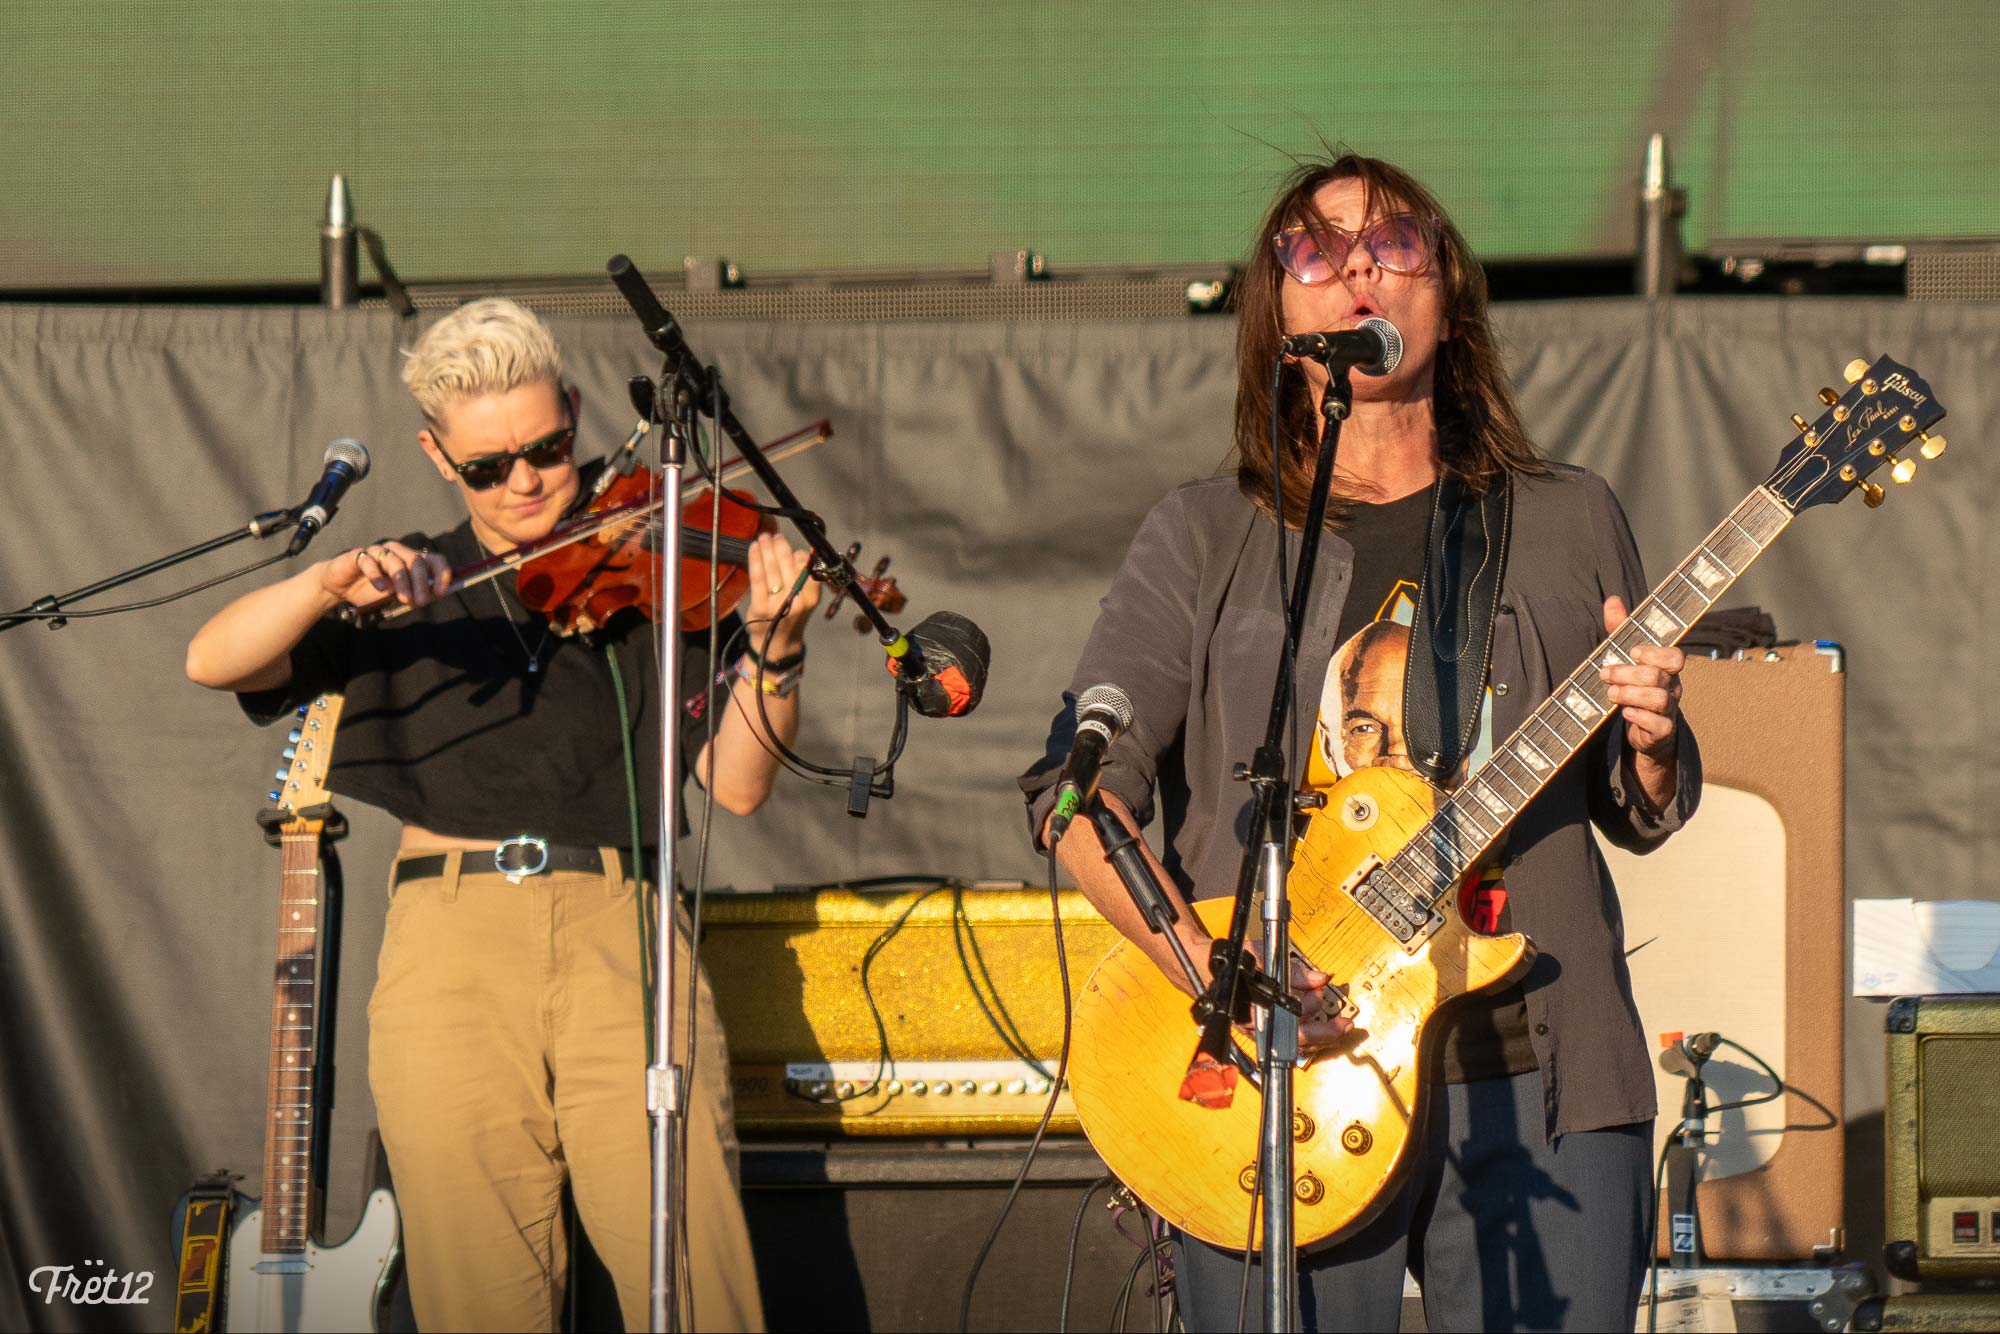 The Breeders at Riot Fest - Photos by FRET12